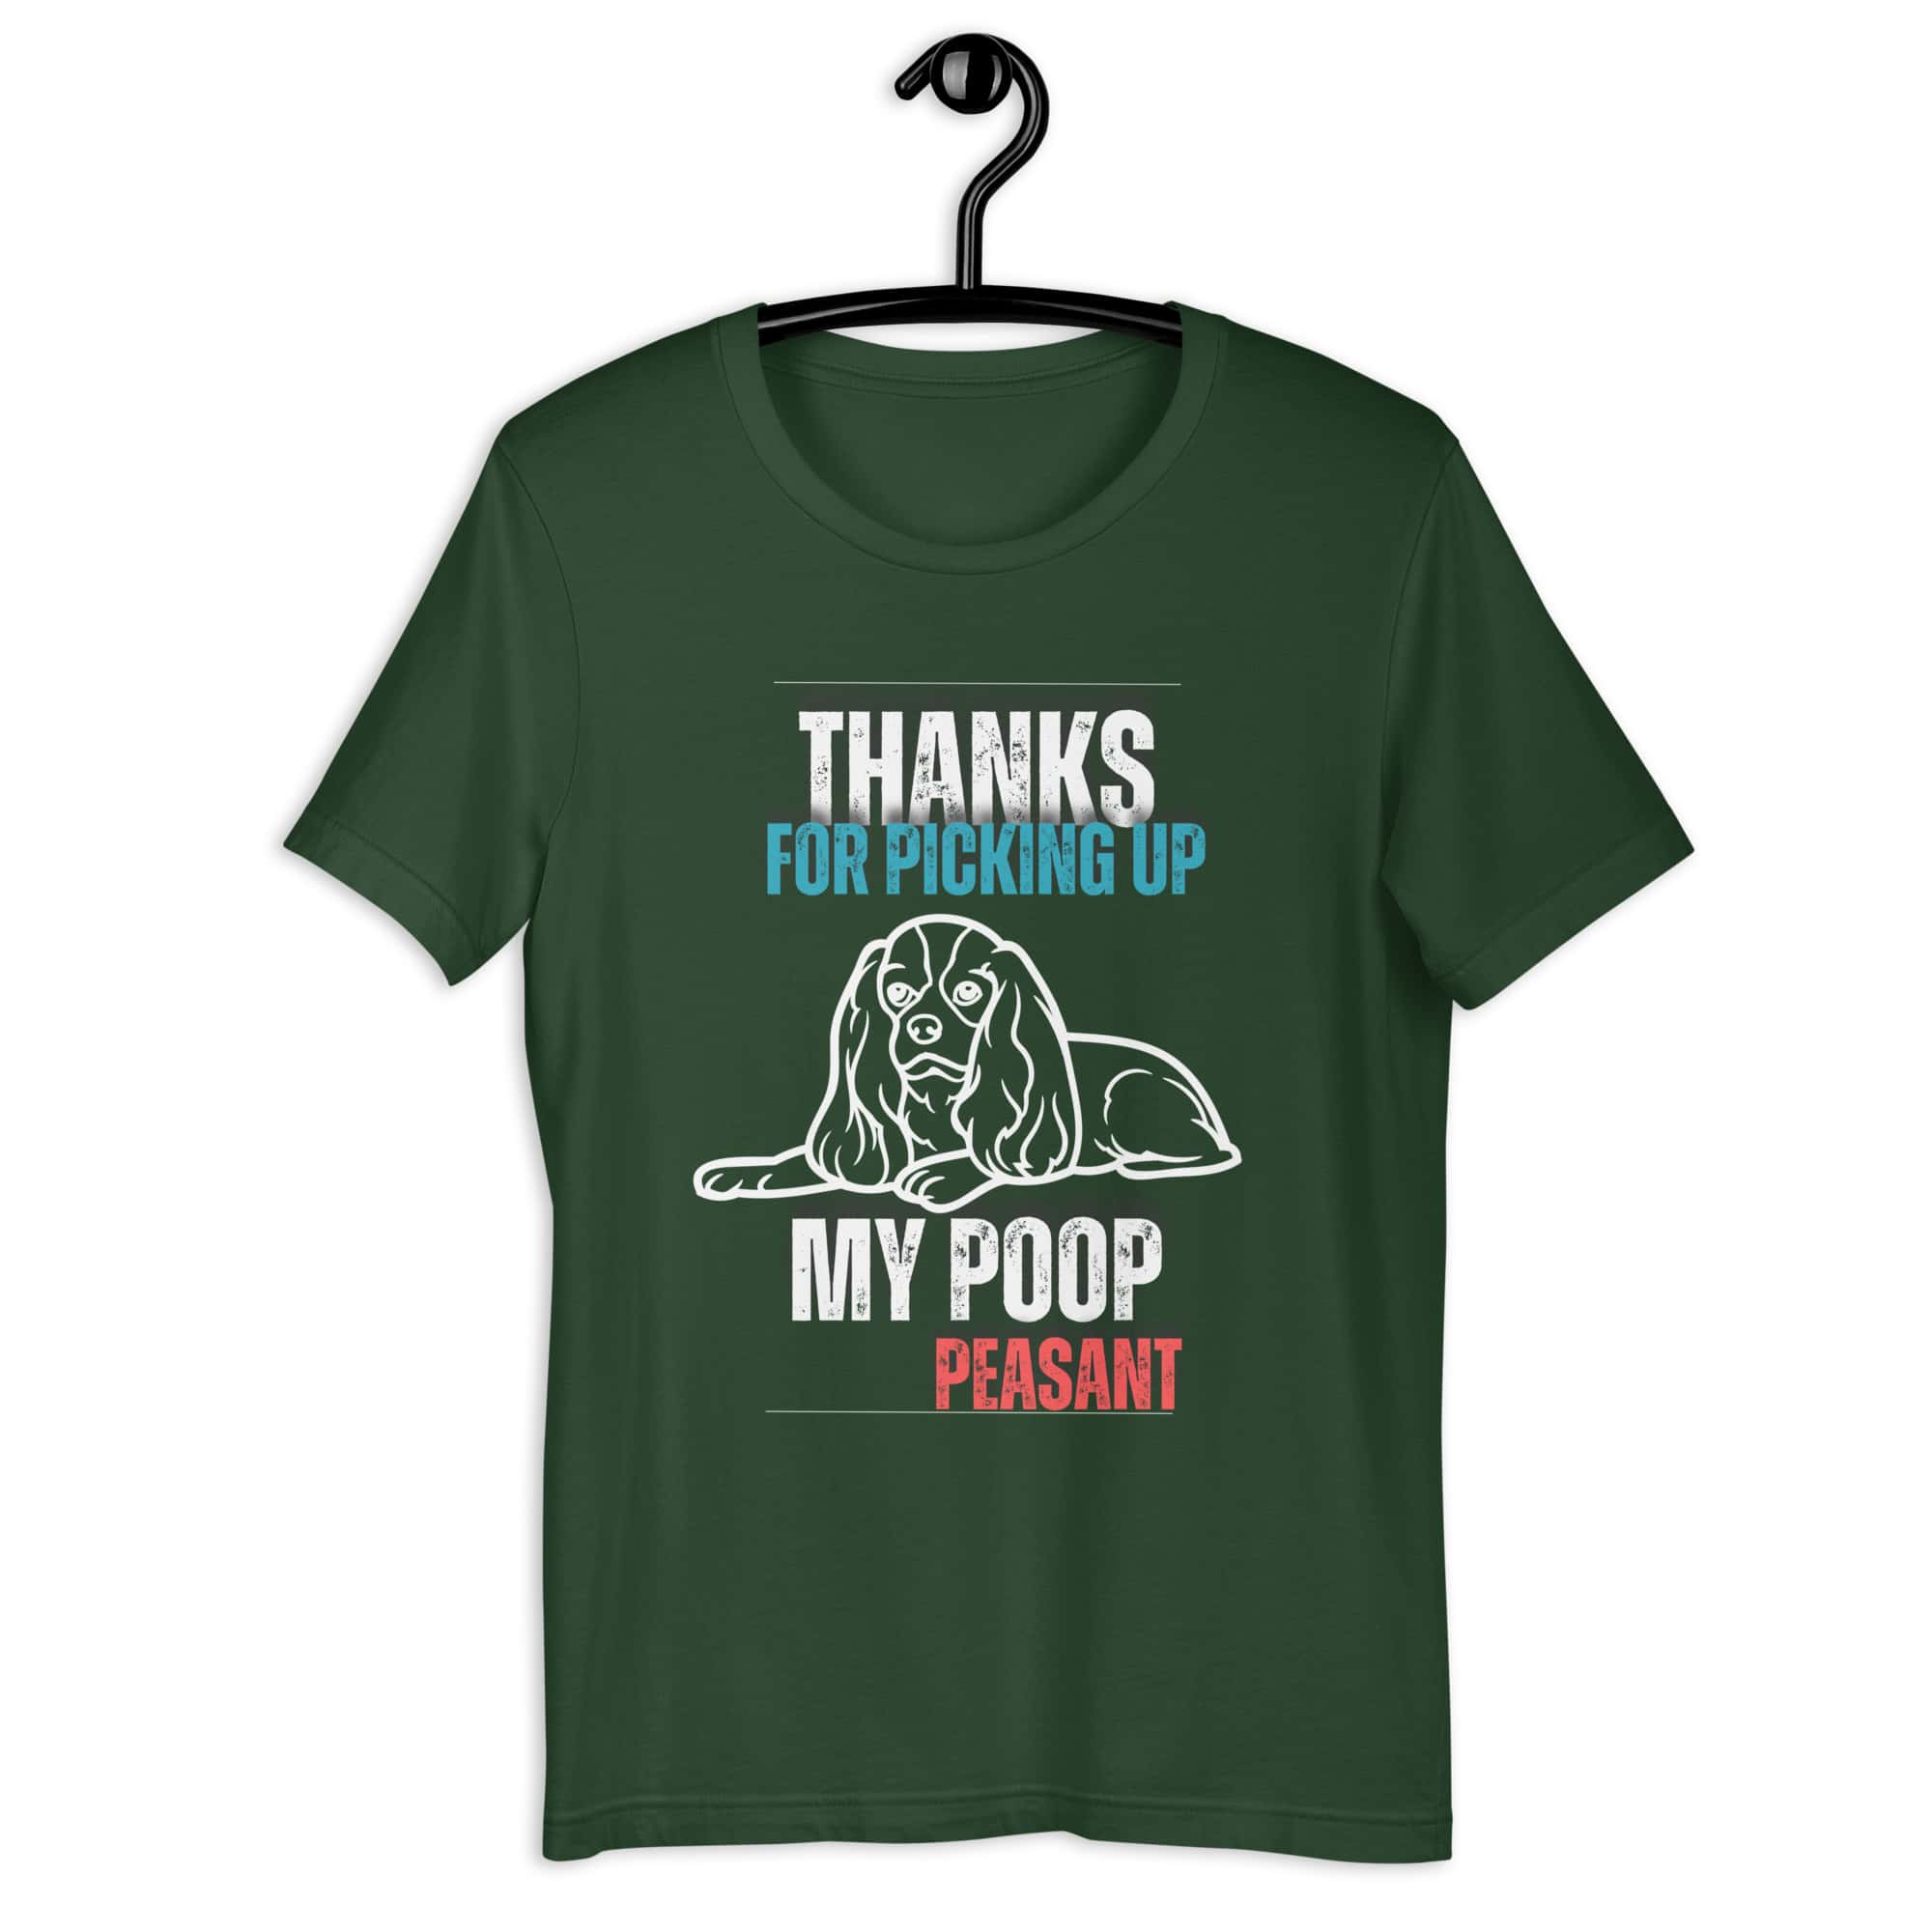 Thanks For Picking Up My POOP Funny Hounds Unisex T-Shirt. Forest